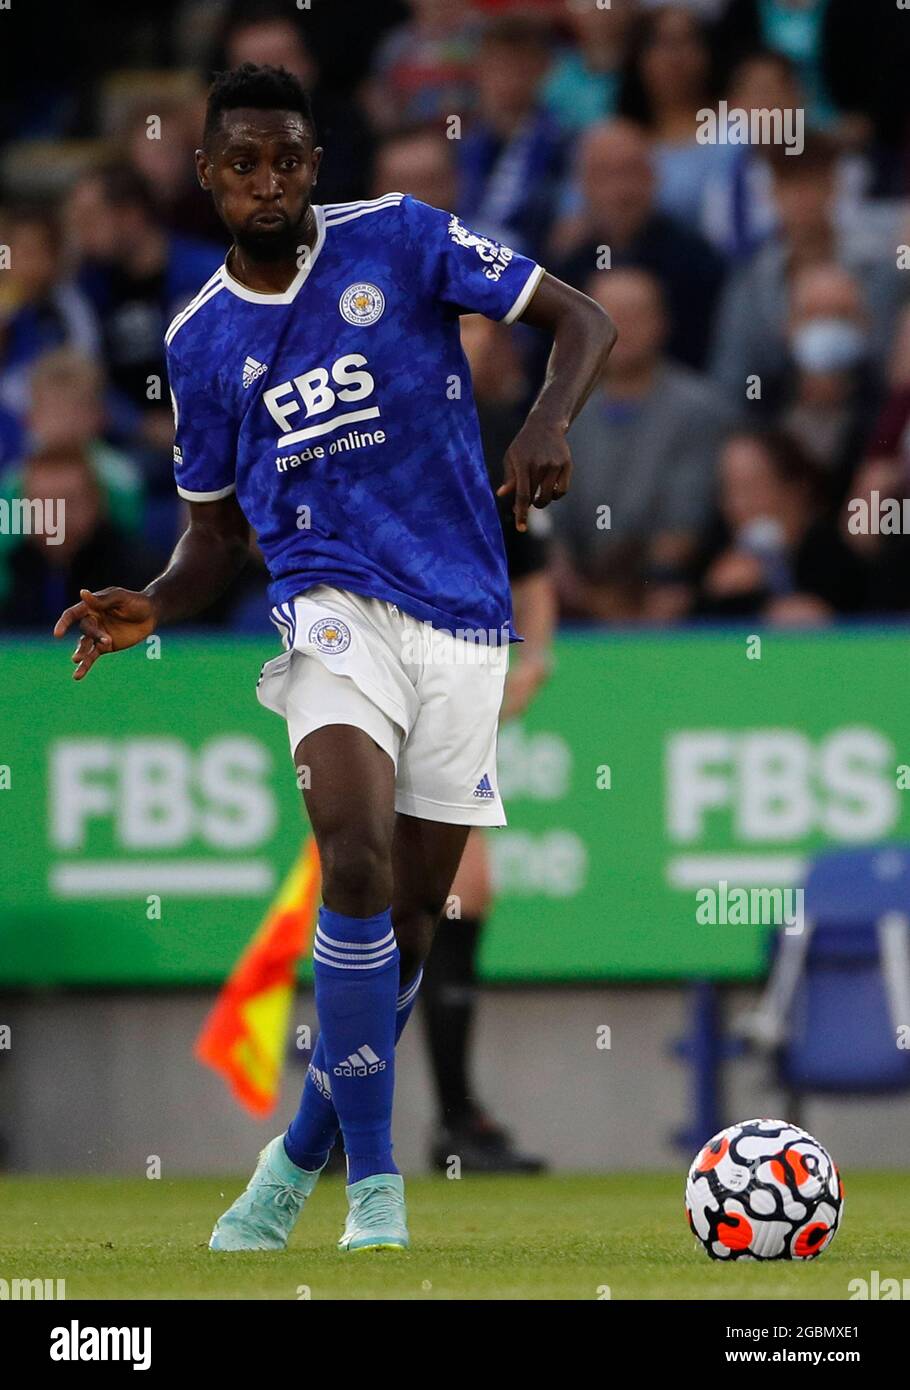 Leicester, England, 4th August 2021.  Wilfred Ndidi of Leicester City during the Pre Season Friendly match at the King Power Stadium, Leicester. Picture credit should read: Darren Staples / Sportimage Stock Photo